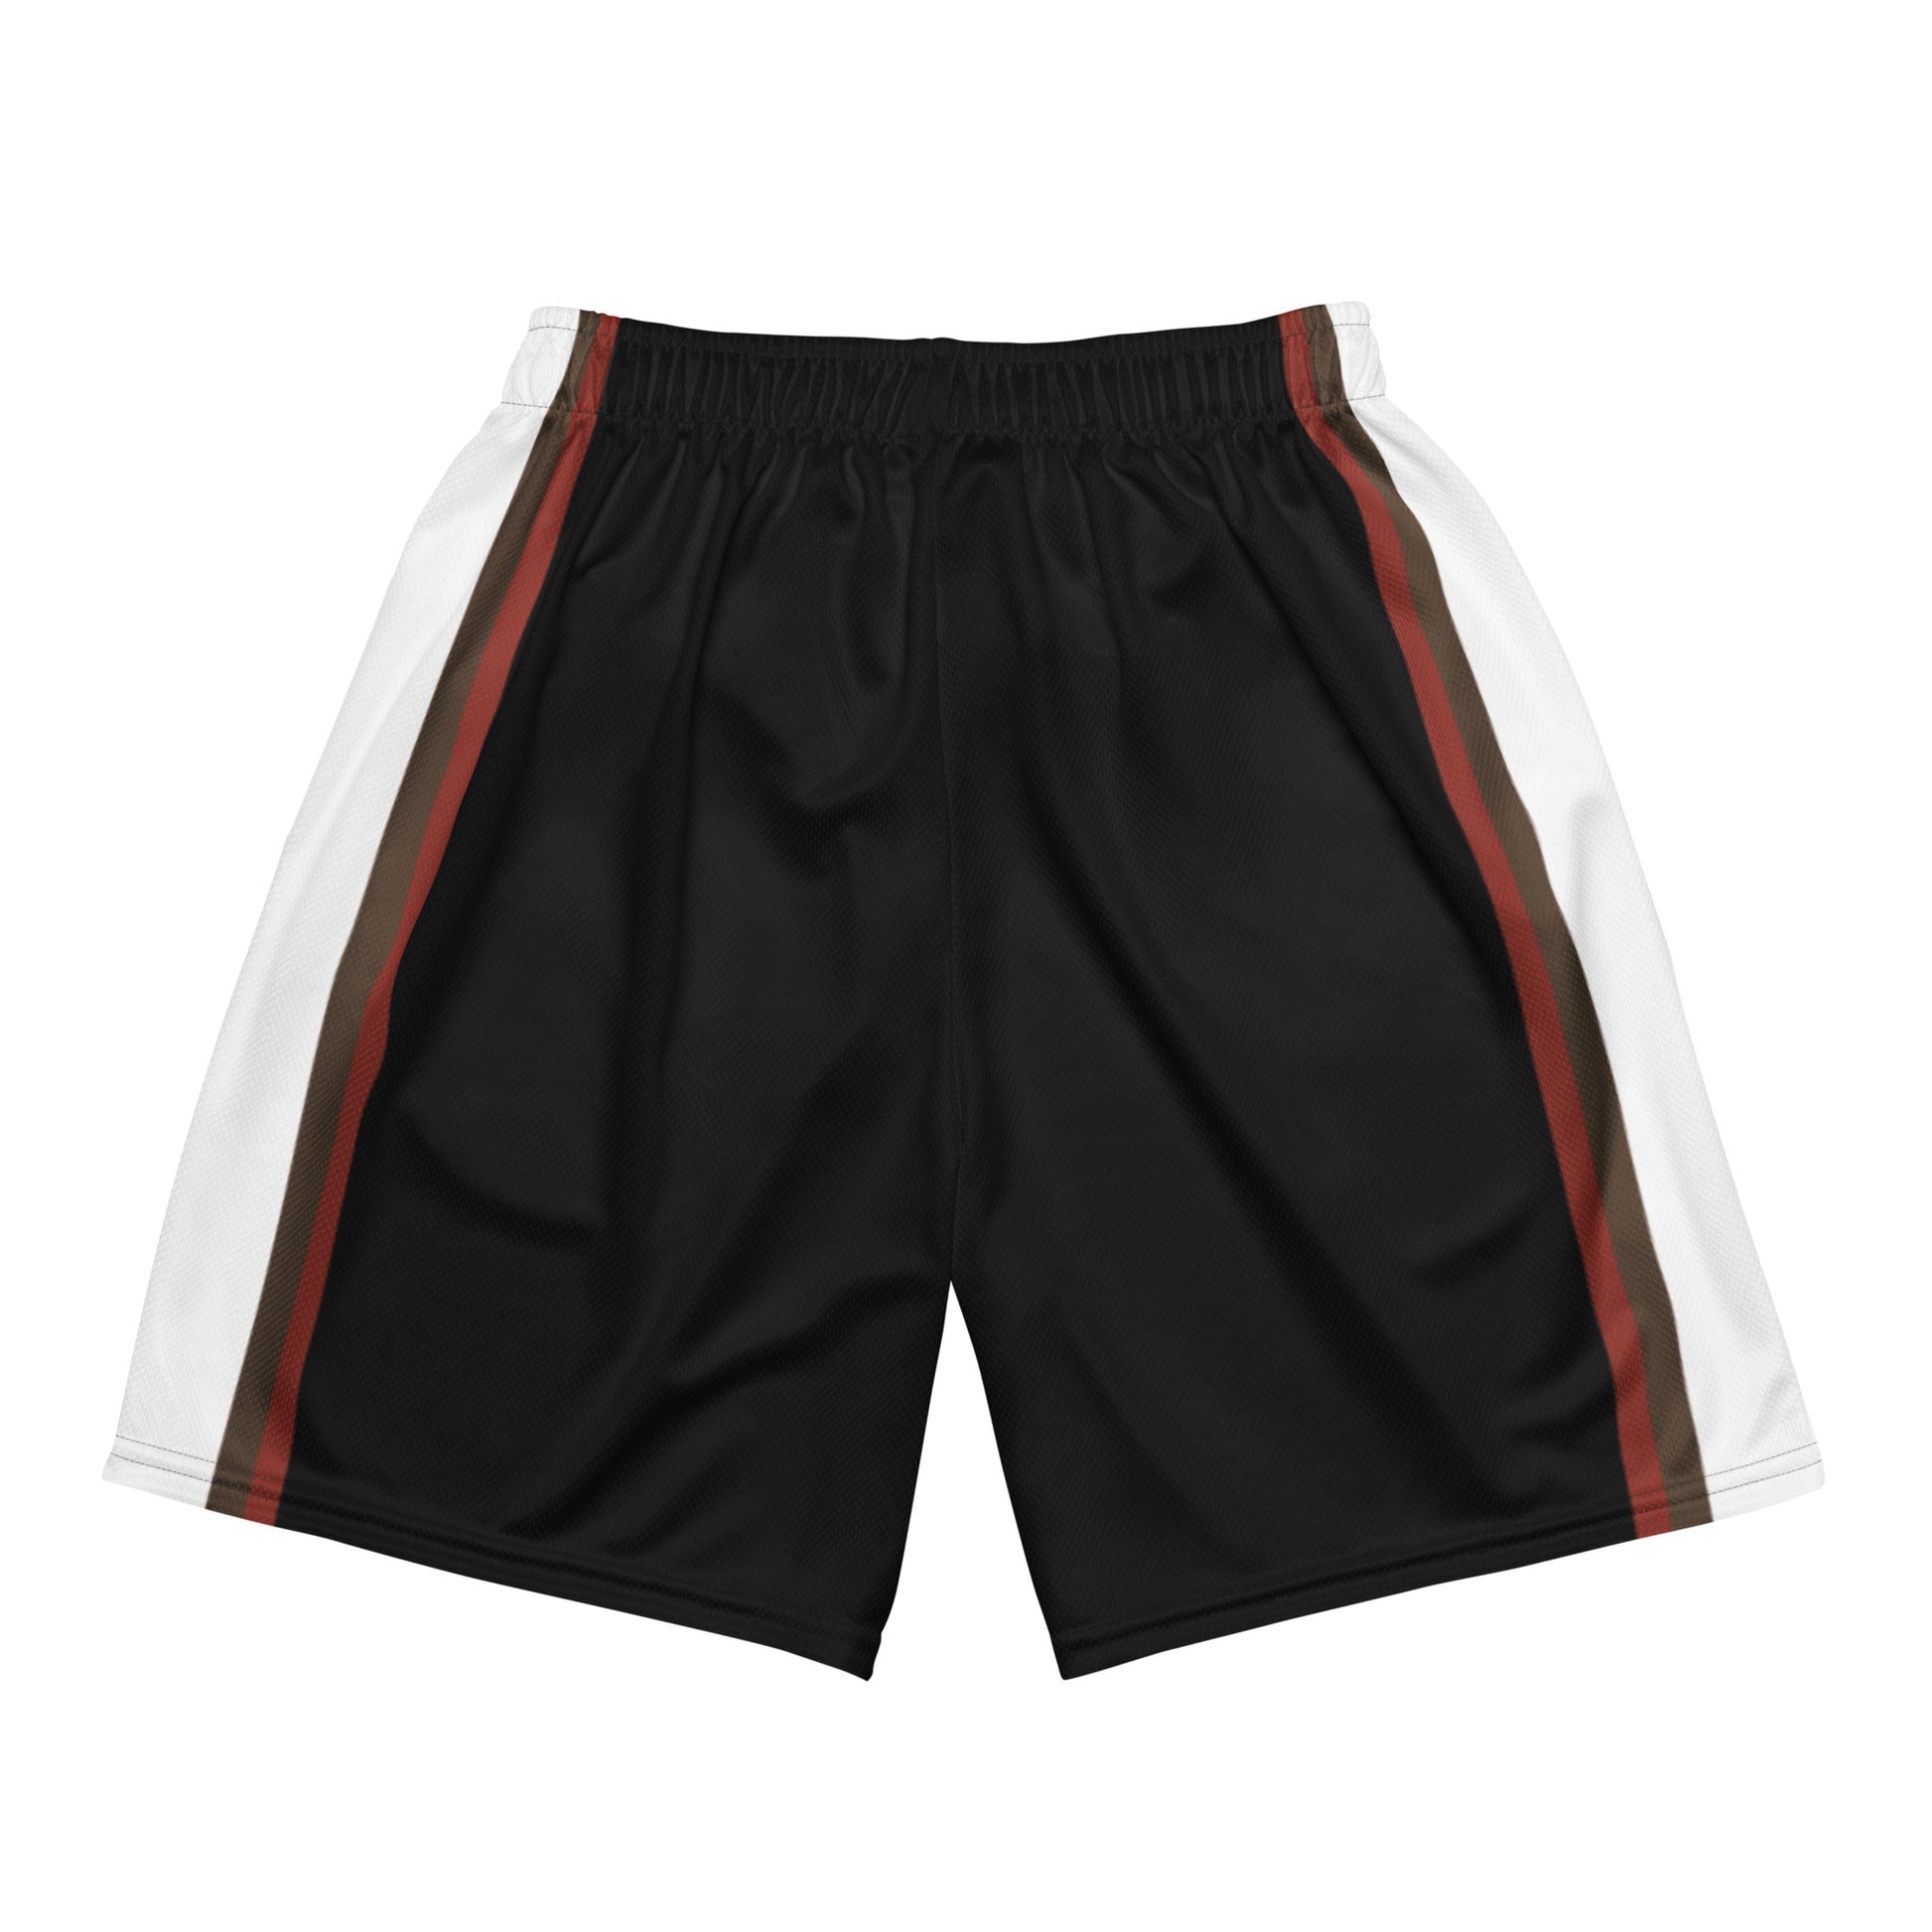 Wildfire Cigars mesh shorts in black red brown and white